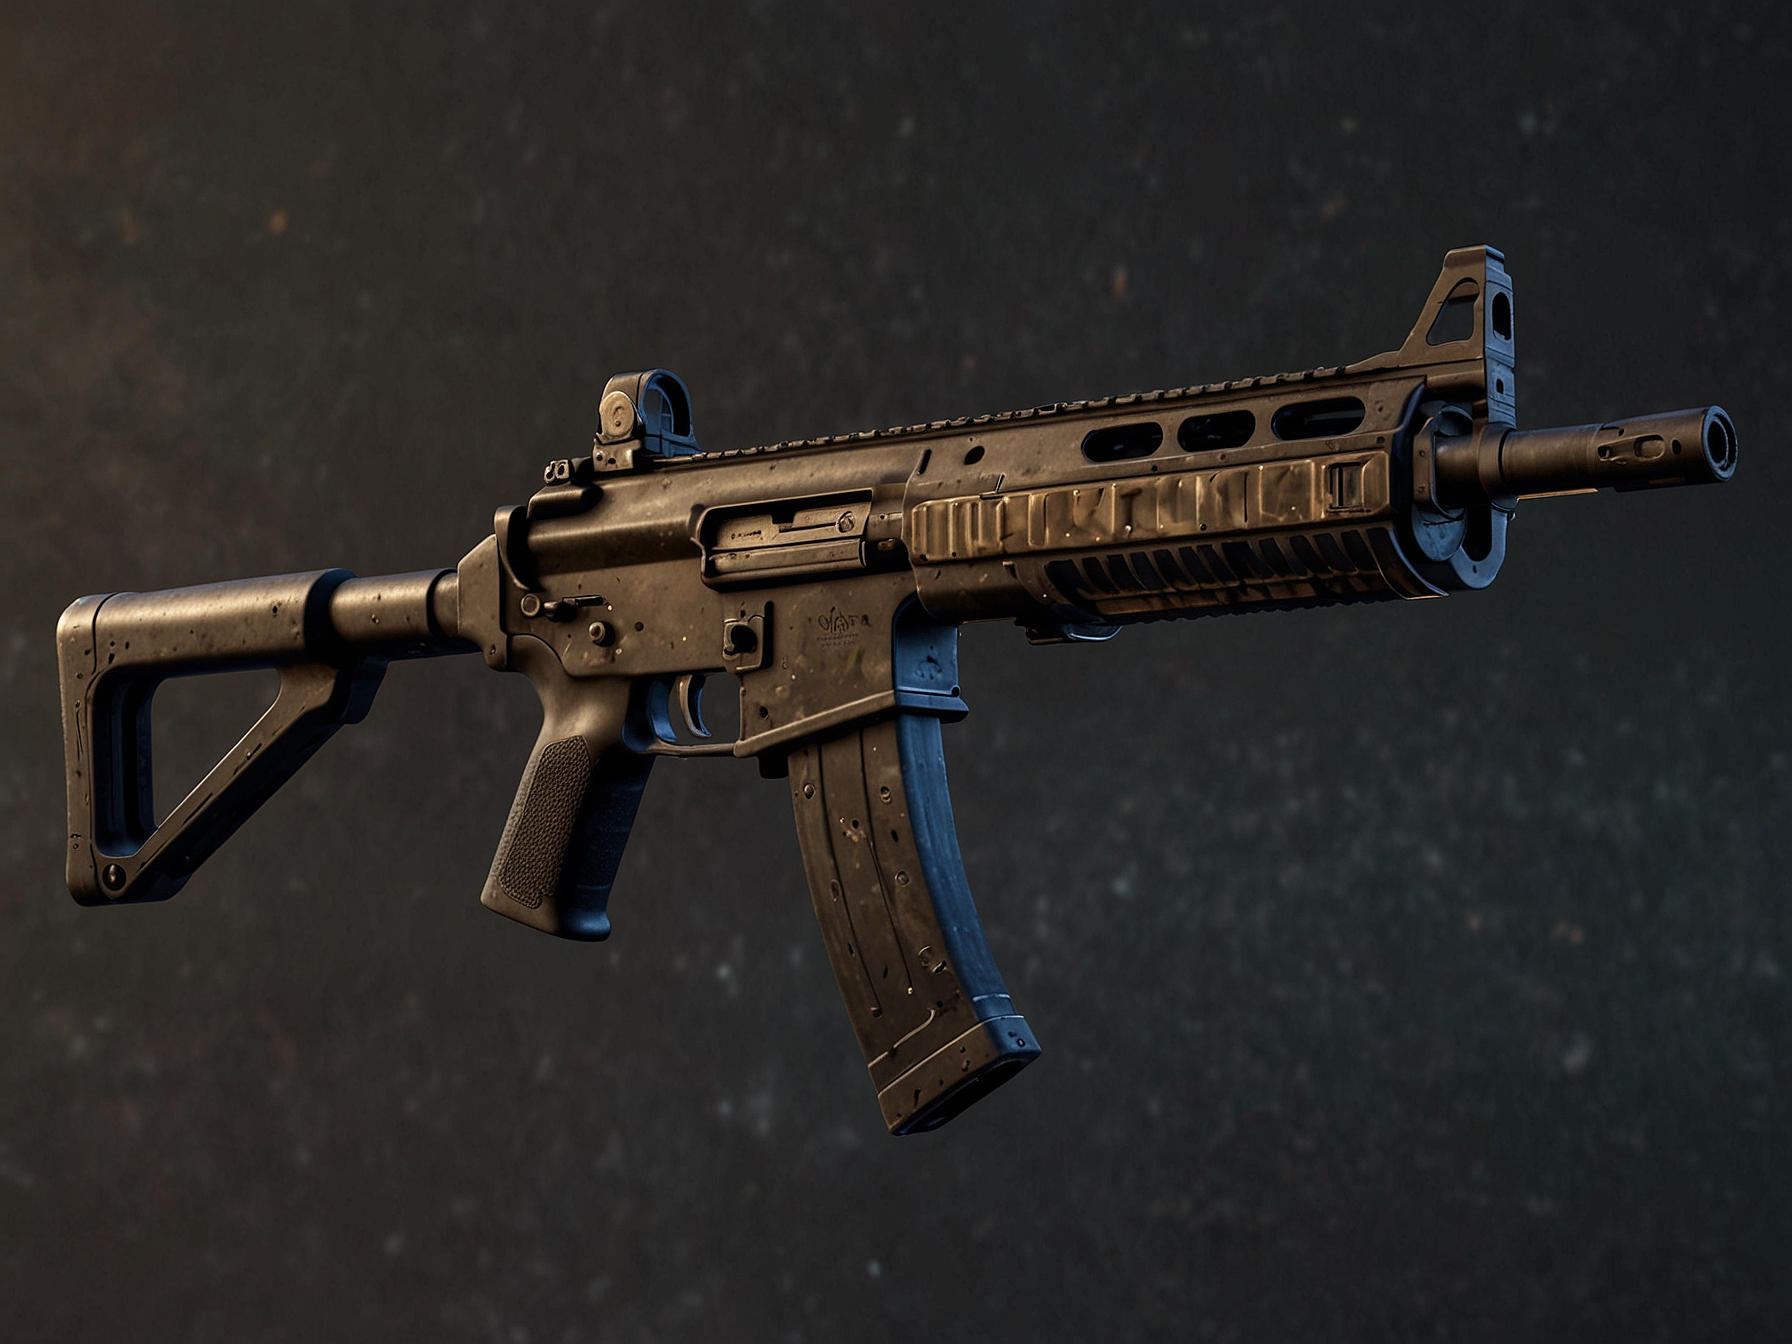 A close-up shot of the new CR-56 AMAX assault rifle in action within Call of Duty: Mobile's Digital Dusk season. The weapon is shown with various attachments, highlighting its versatility in different combat scenarios.